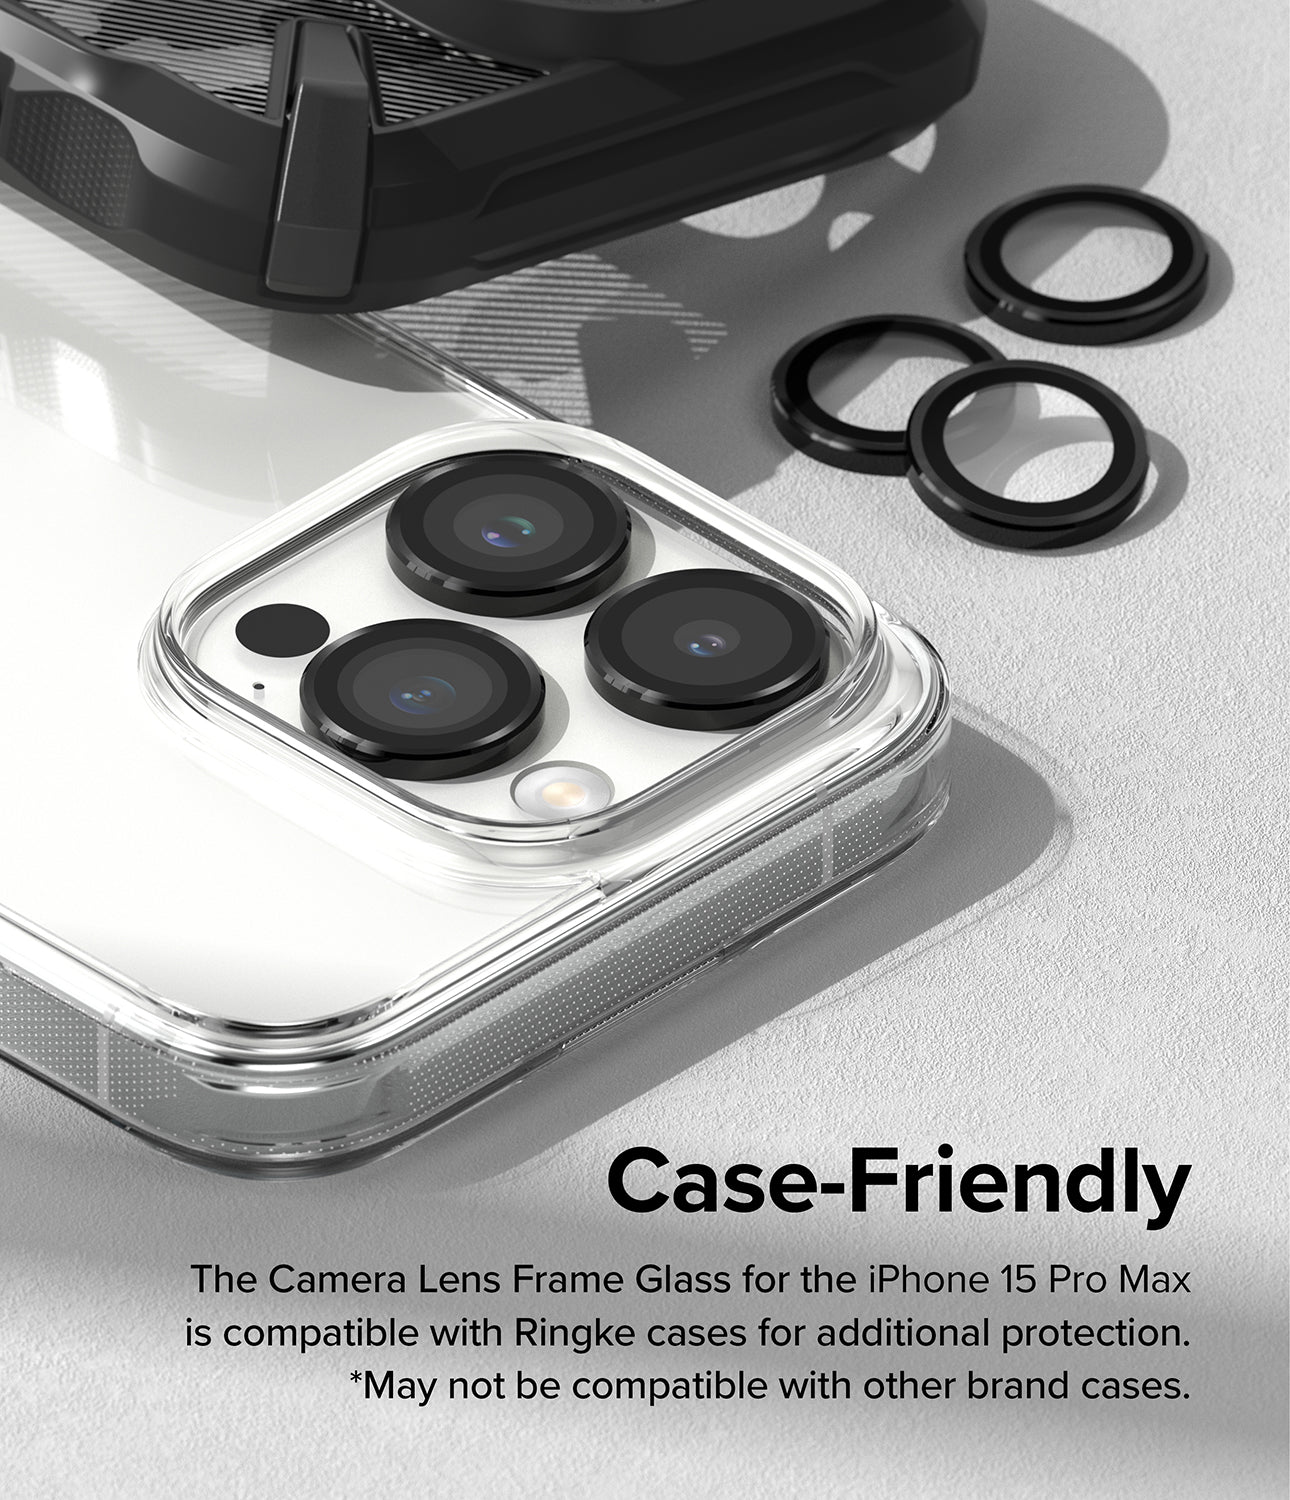 iPhone 15 Pro Max | Camera Lens Frame Glass- Case-Friendly. The Camera Lens Frame Glass for the iPhone 15 Pro Max is compatible with Ringke cases for additional protection. May not be compatible with other brand cases.